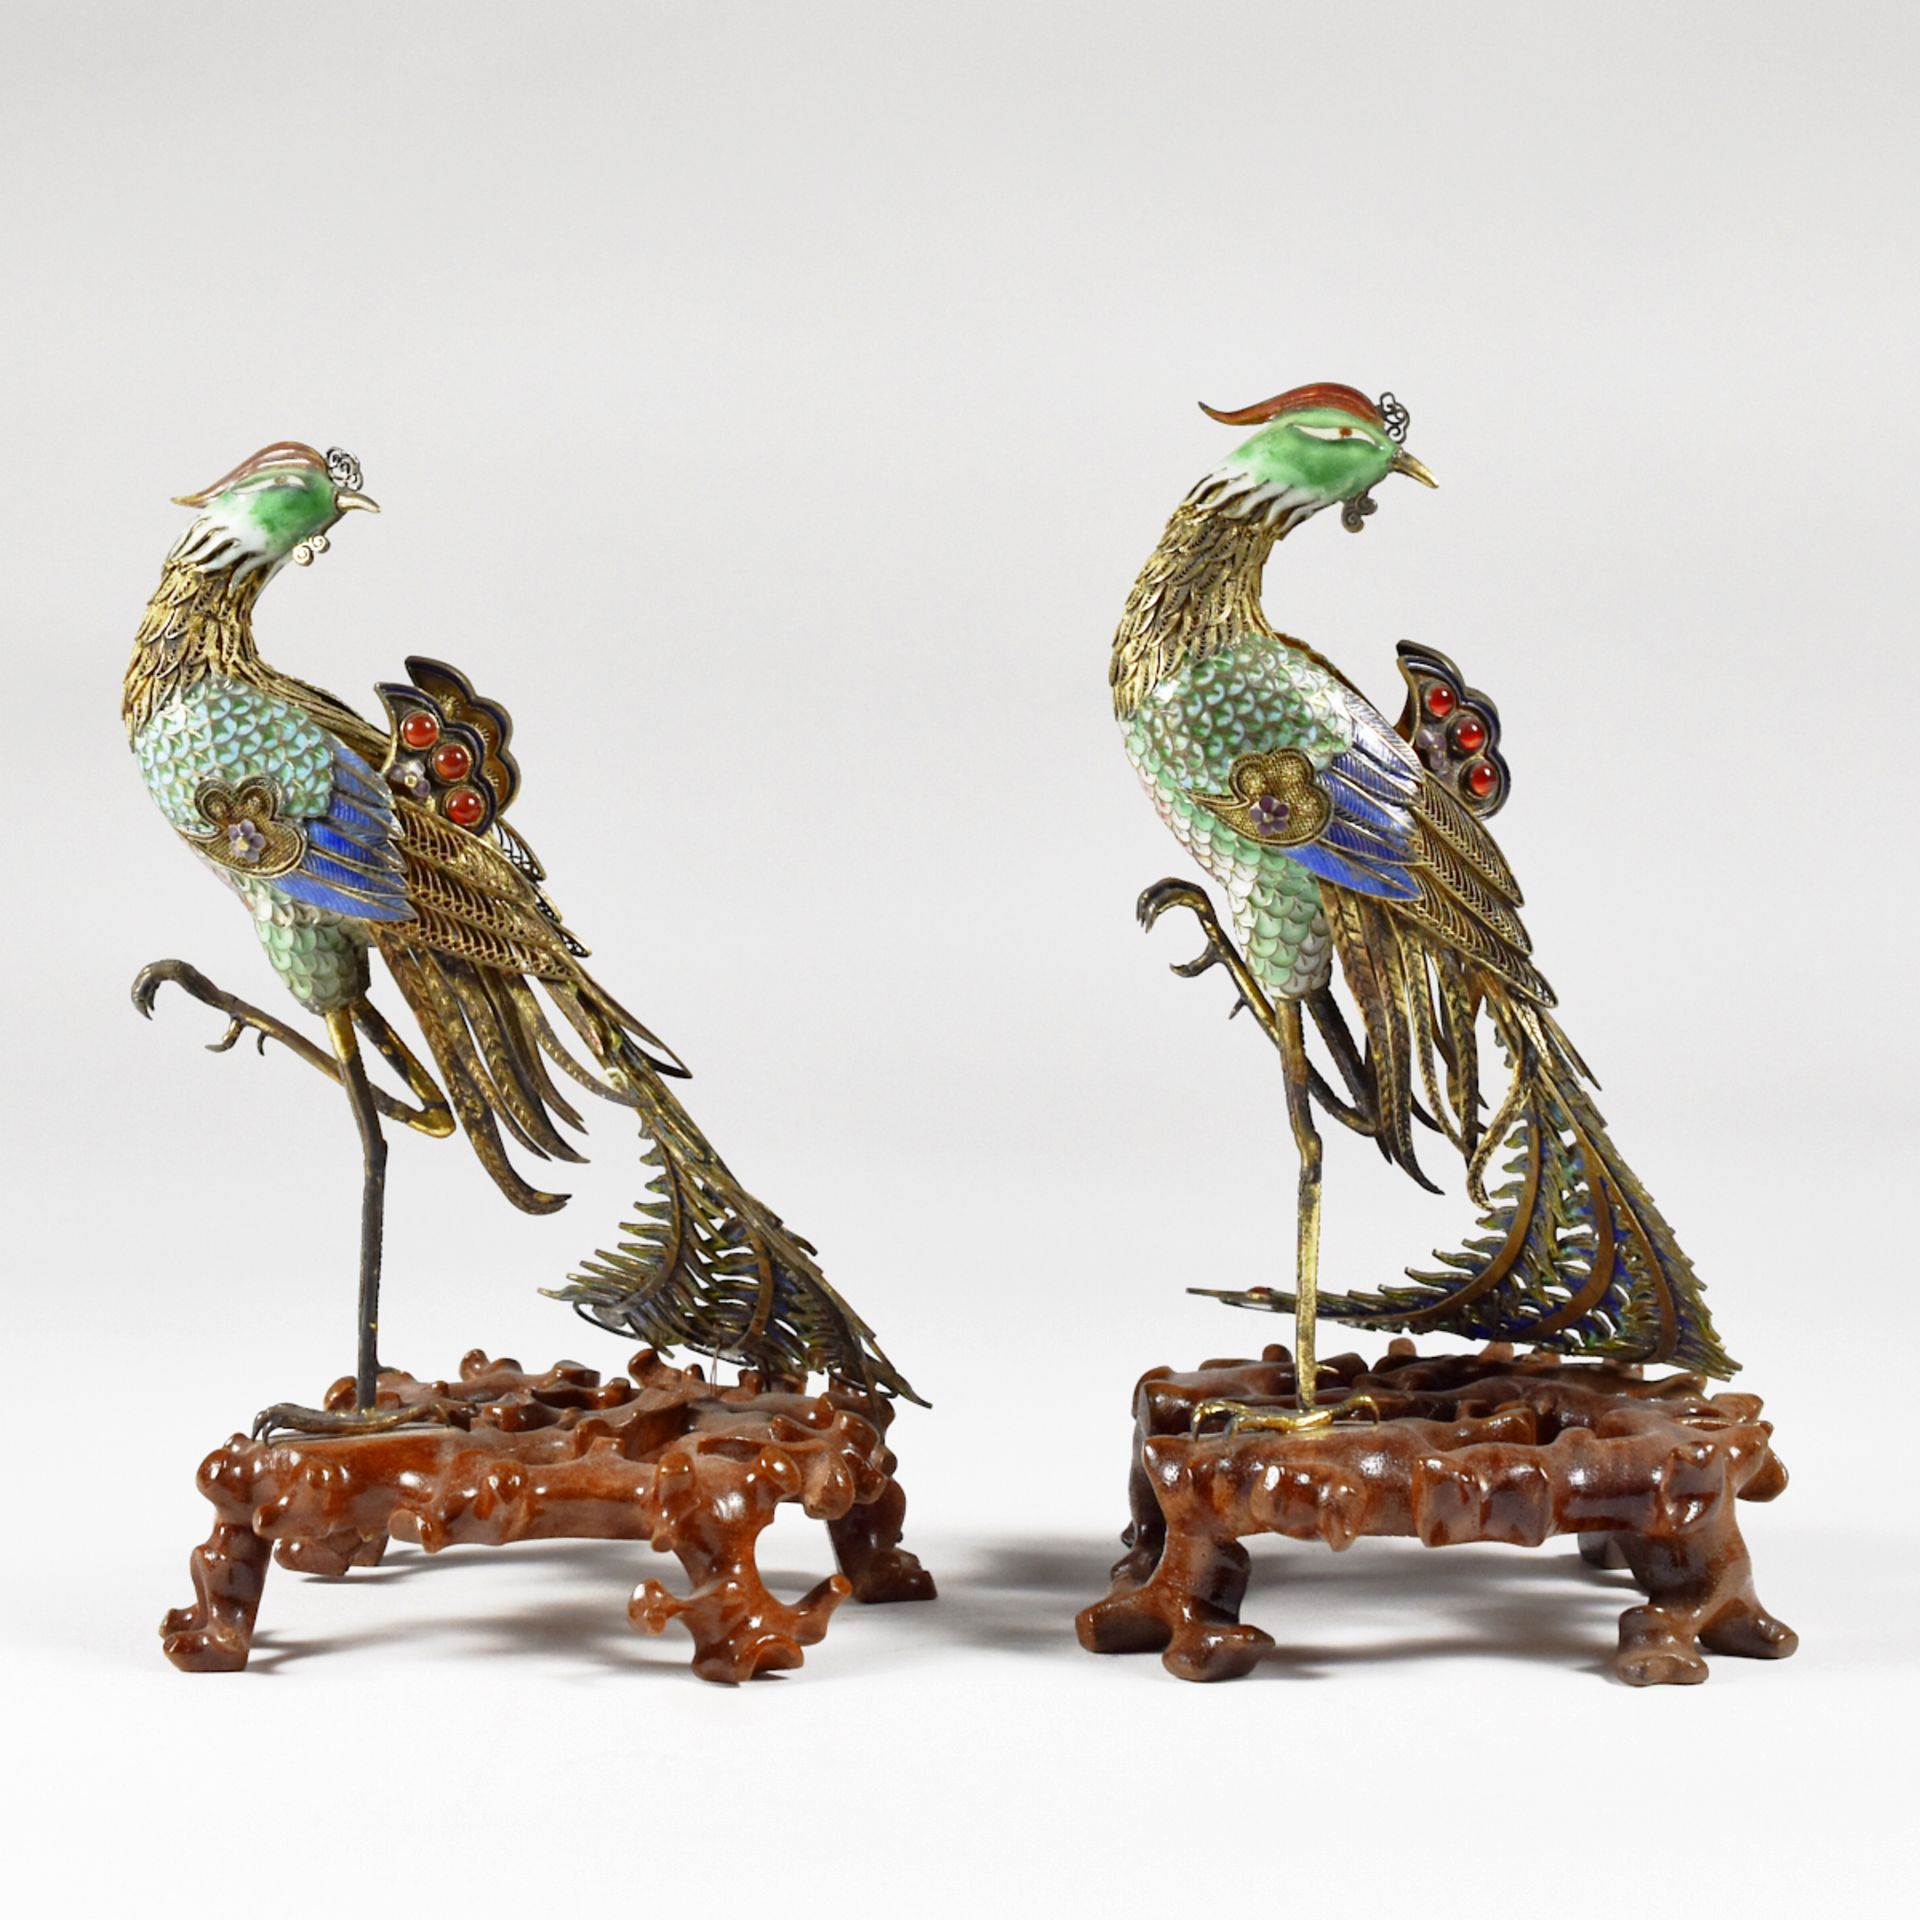 Pair of Chinese Enameled Silver Phoenix Birds - Image 3 of 7